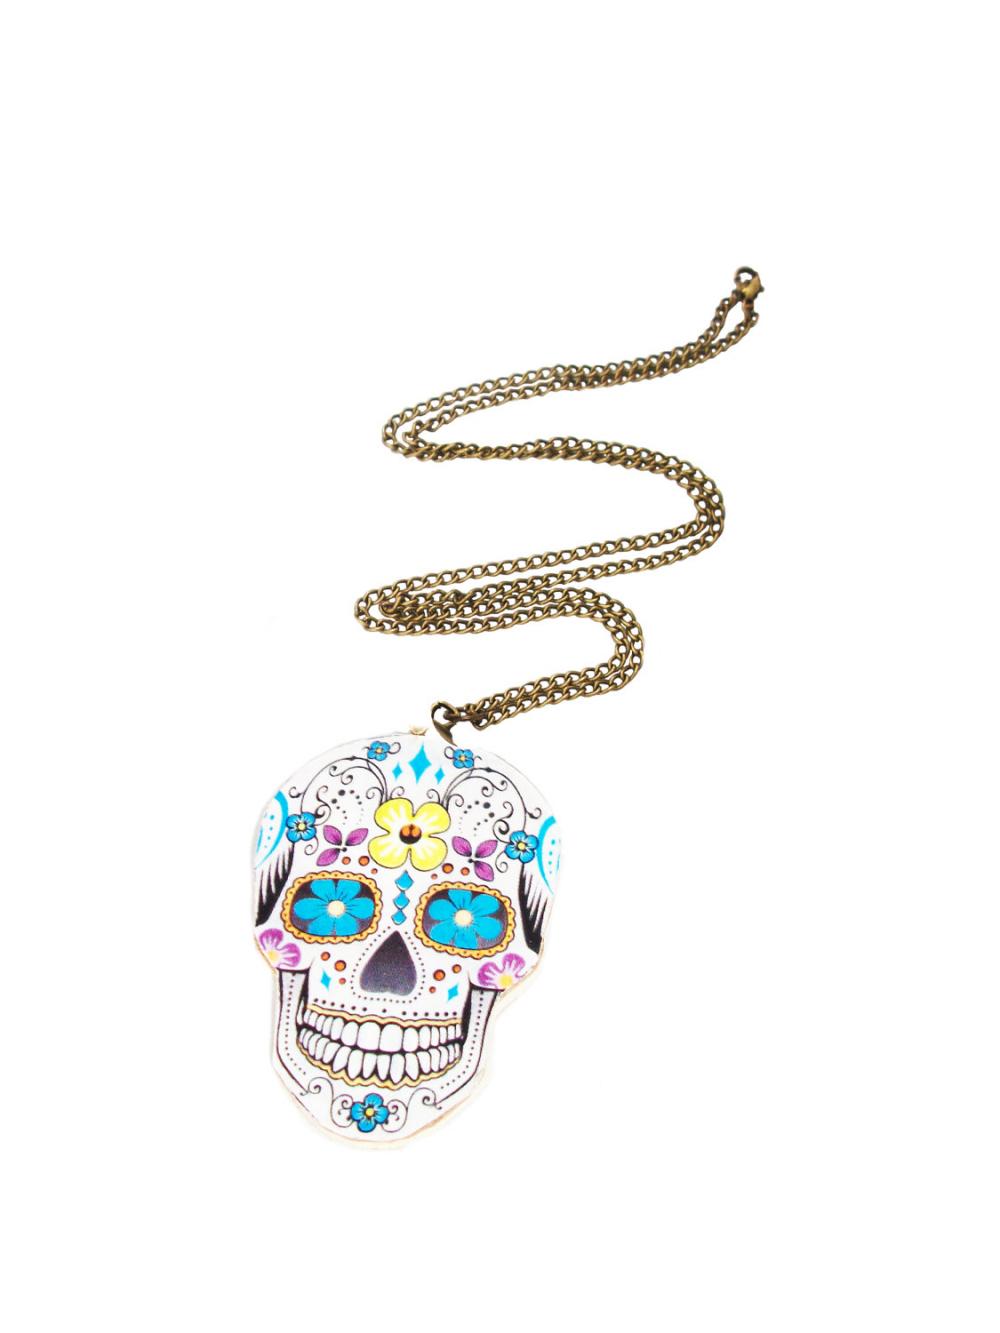 Day Of The Dead Necklace, Wooden Necklace, Skull Necklace, Colourful Skull, Sugar Skull